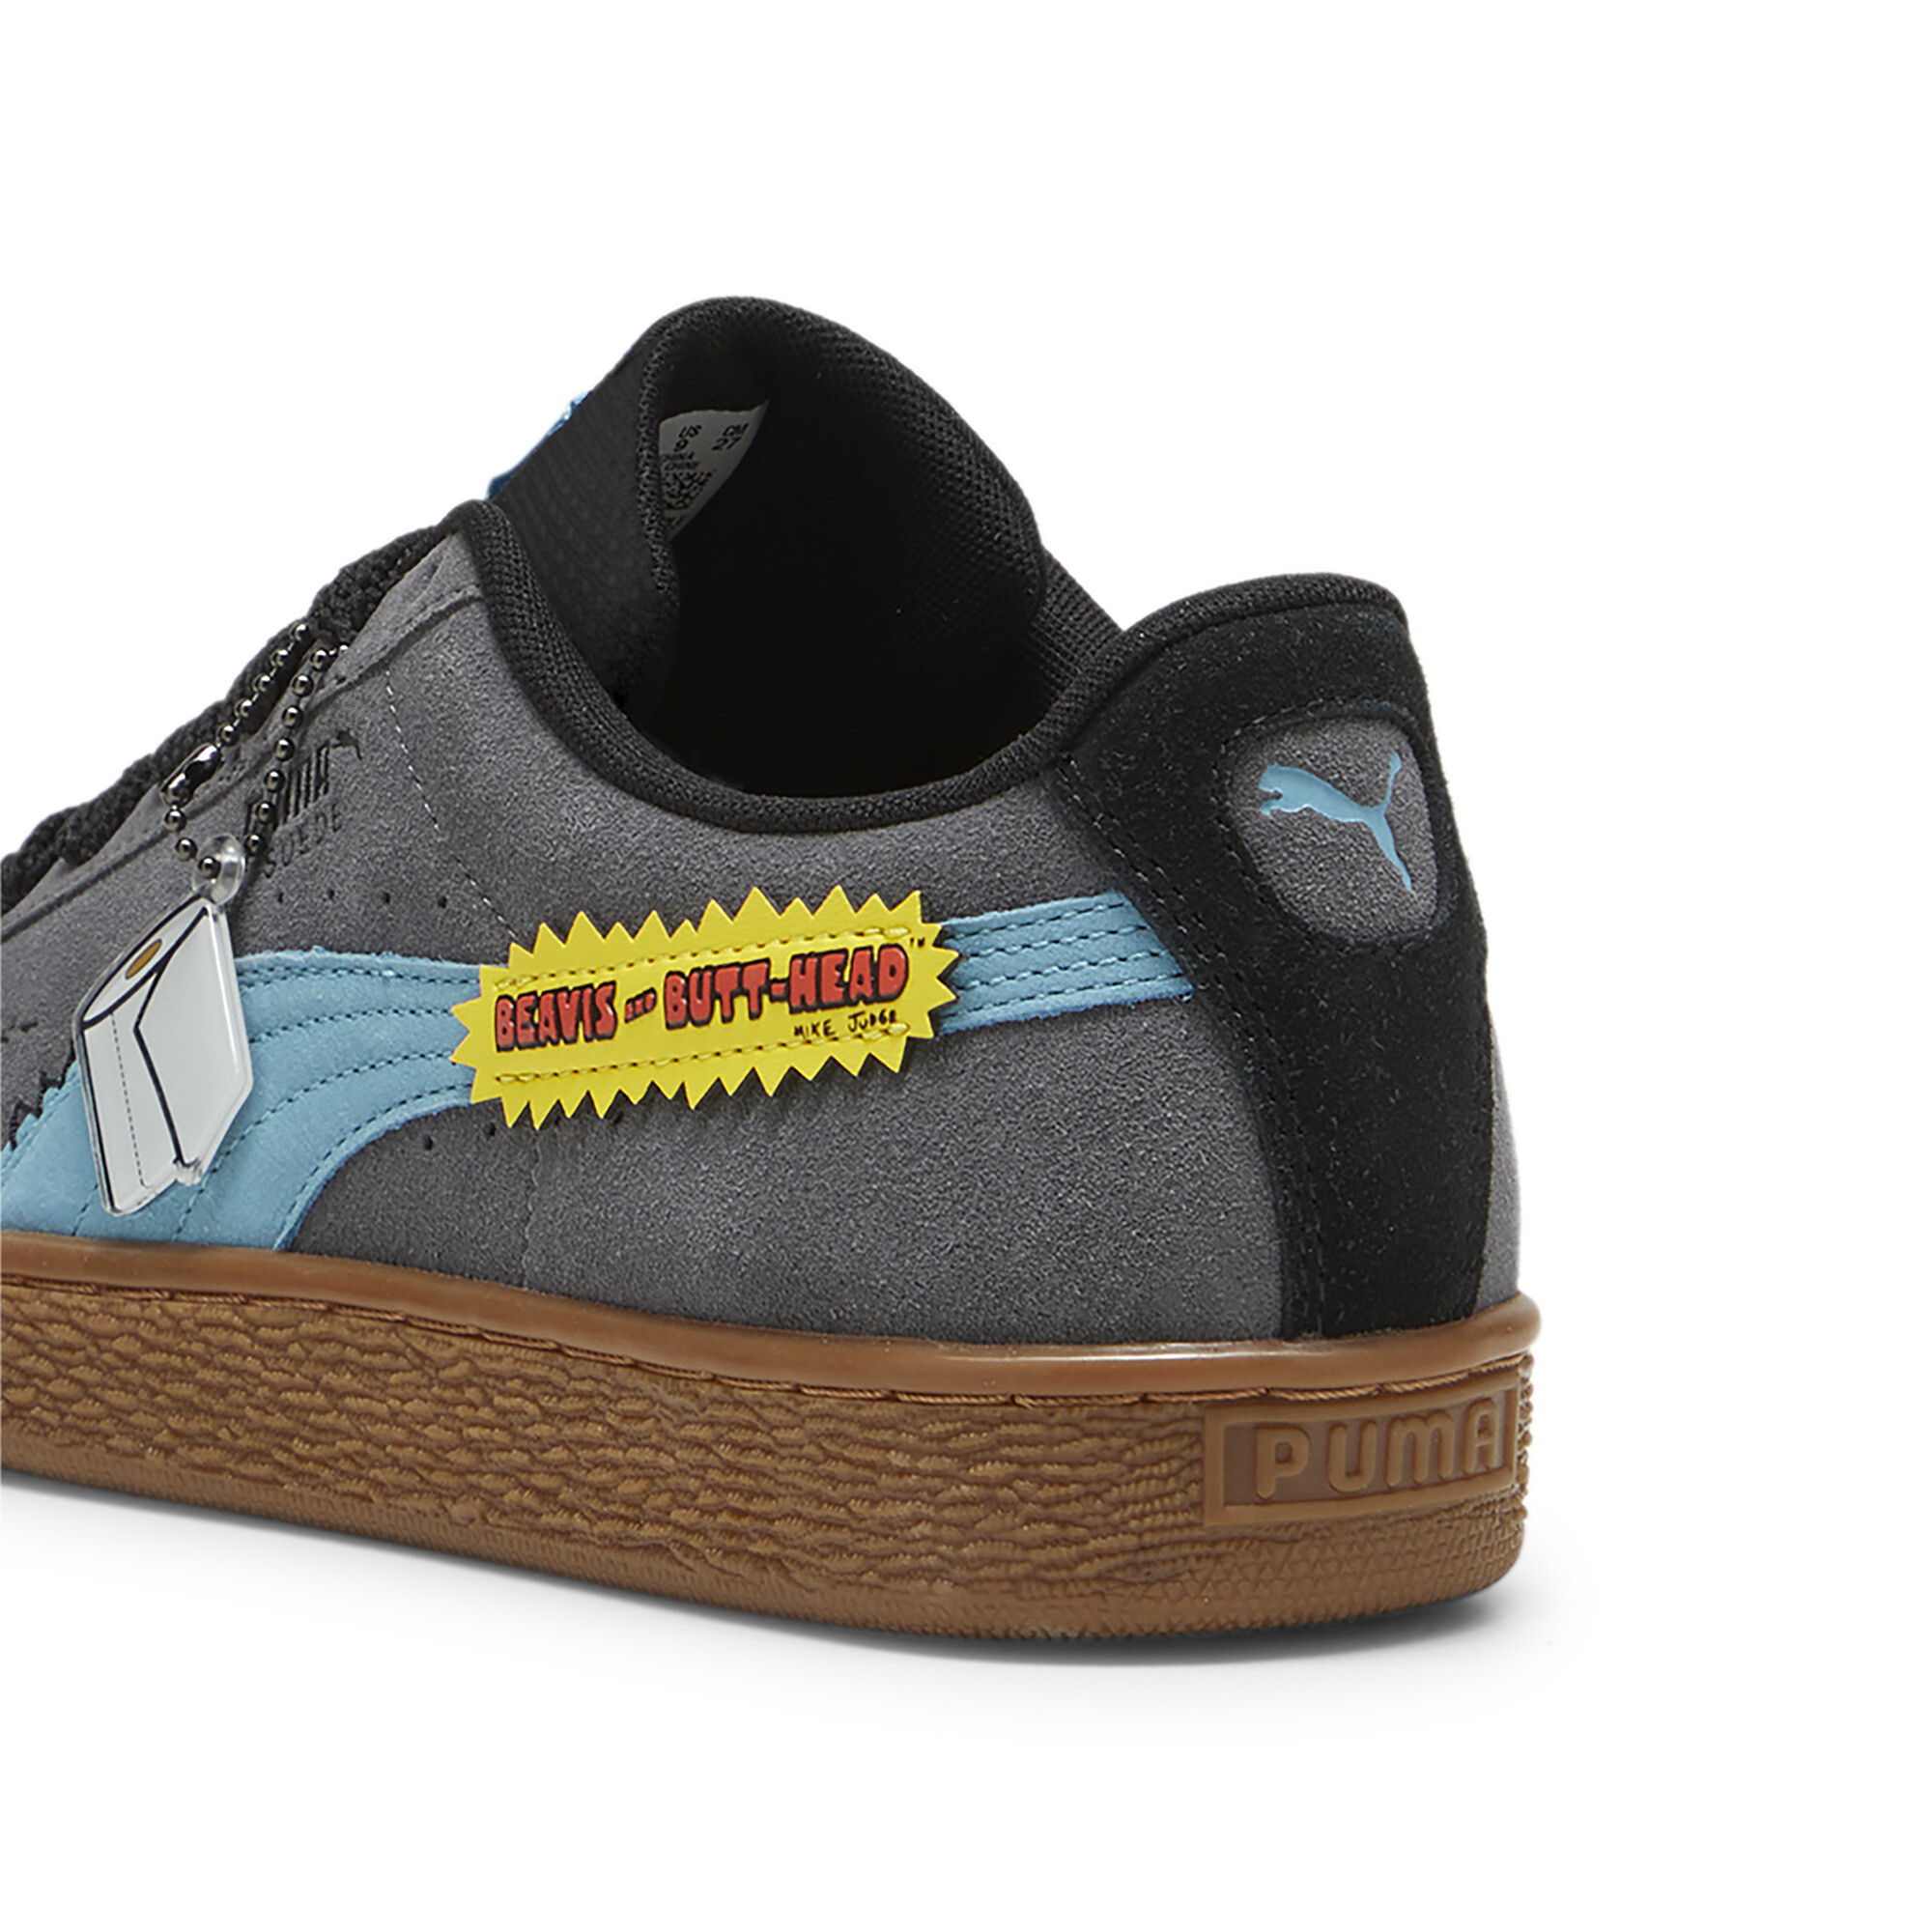 Kids' PUMA X BEAVIS AND BUTTHEAD Suede Sneakers In Gray, Size EU 47